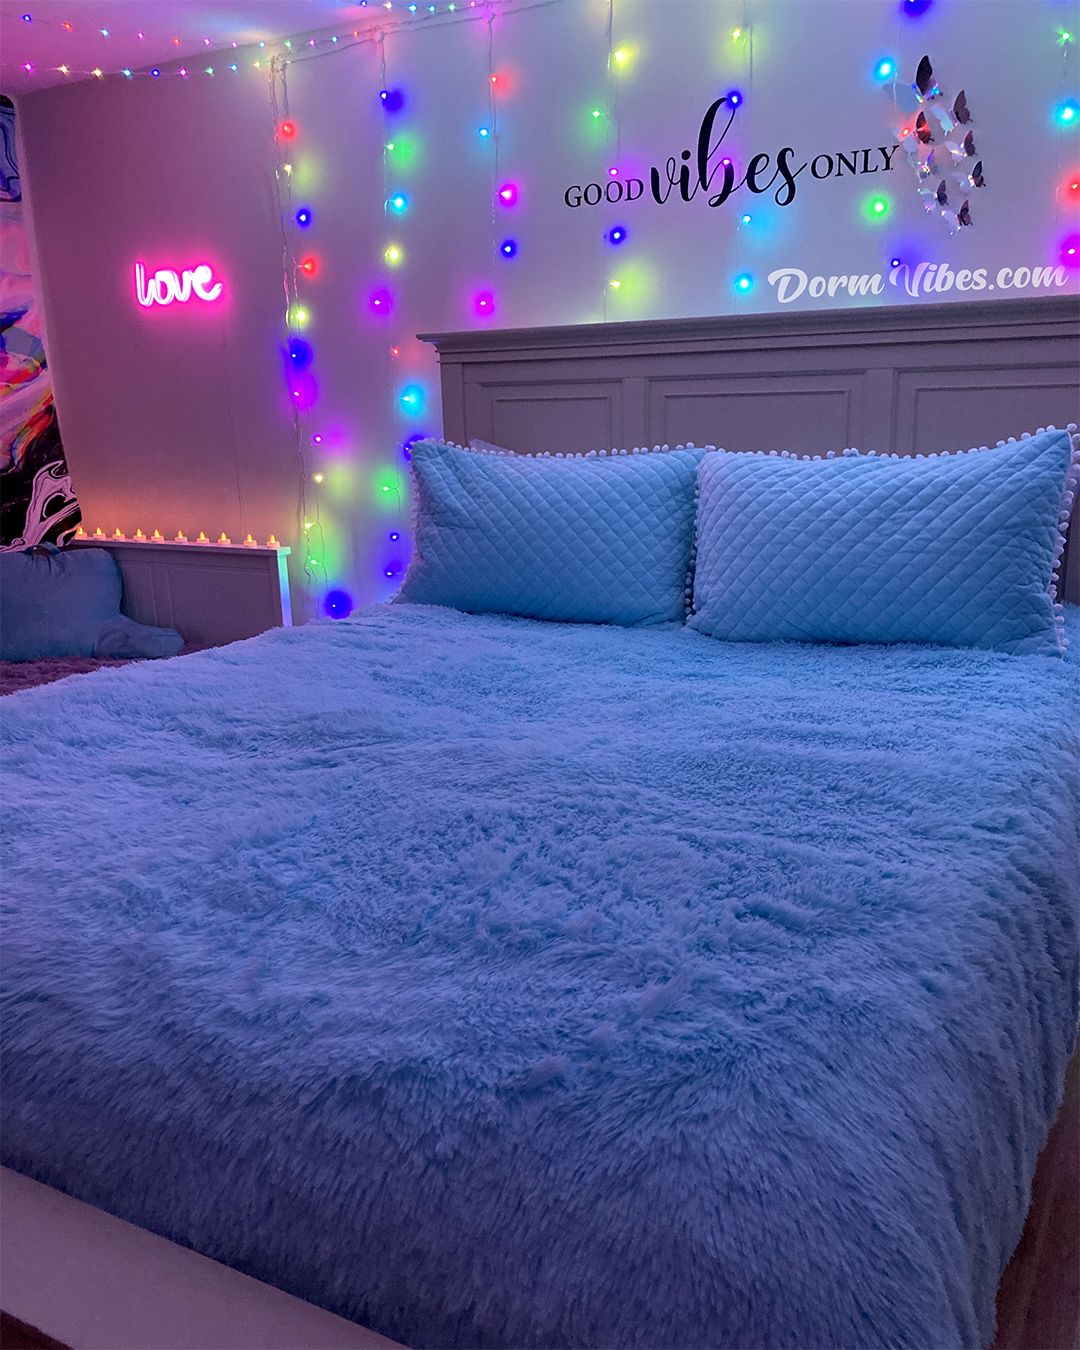 Aesthetic room with a good vibe